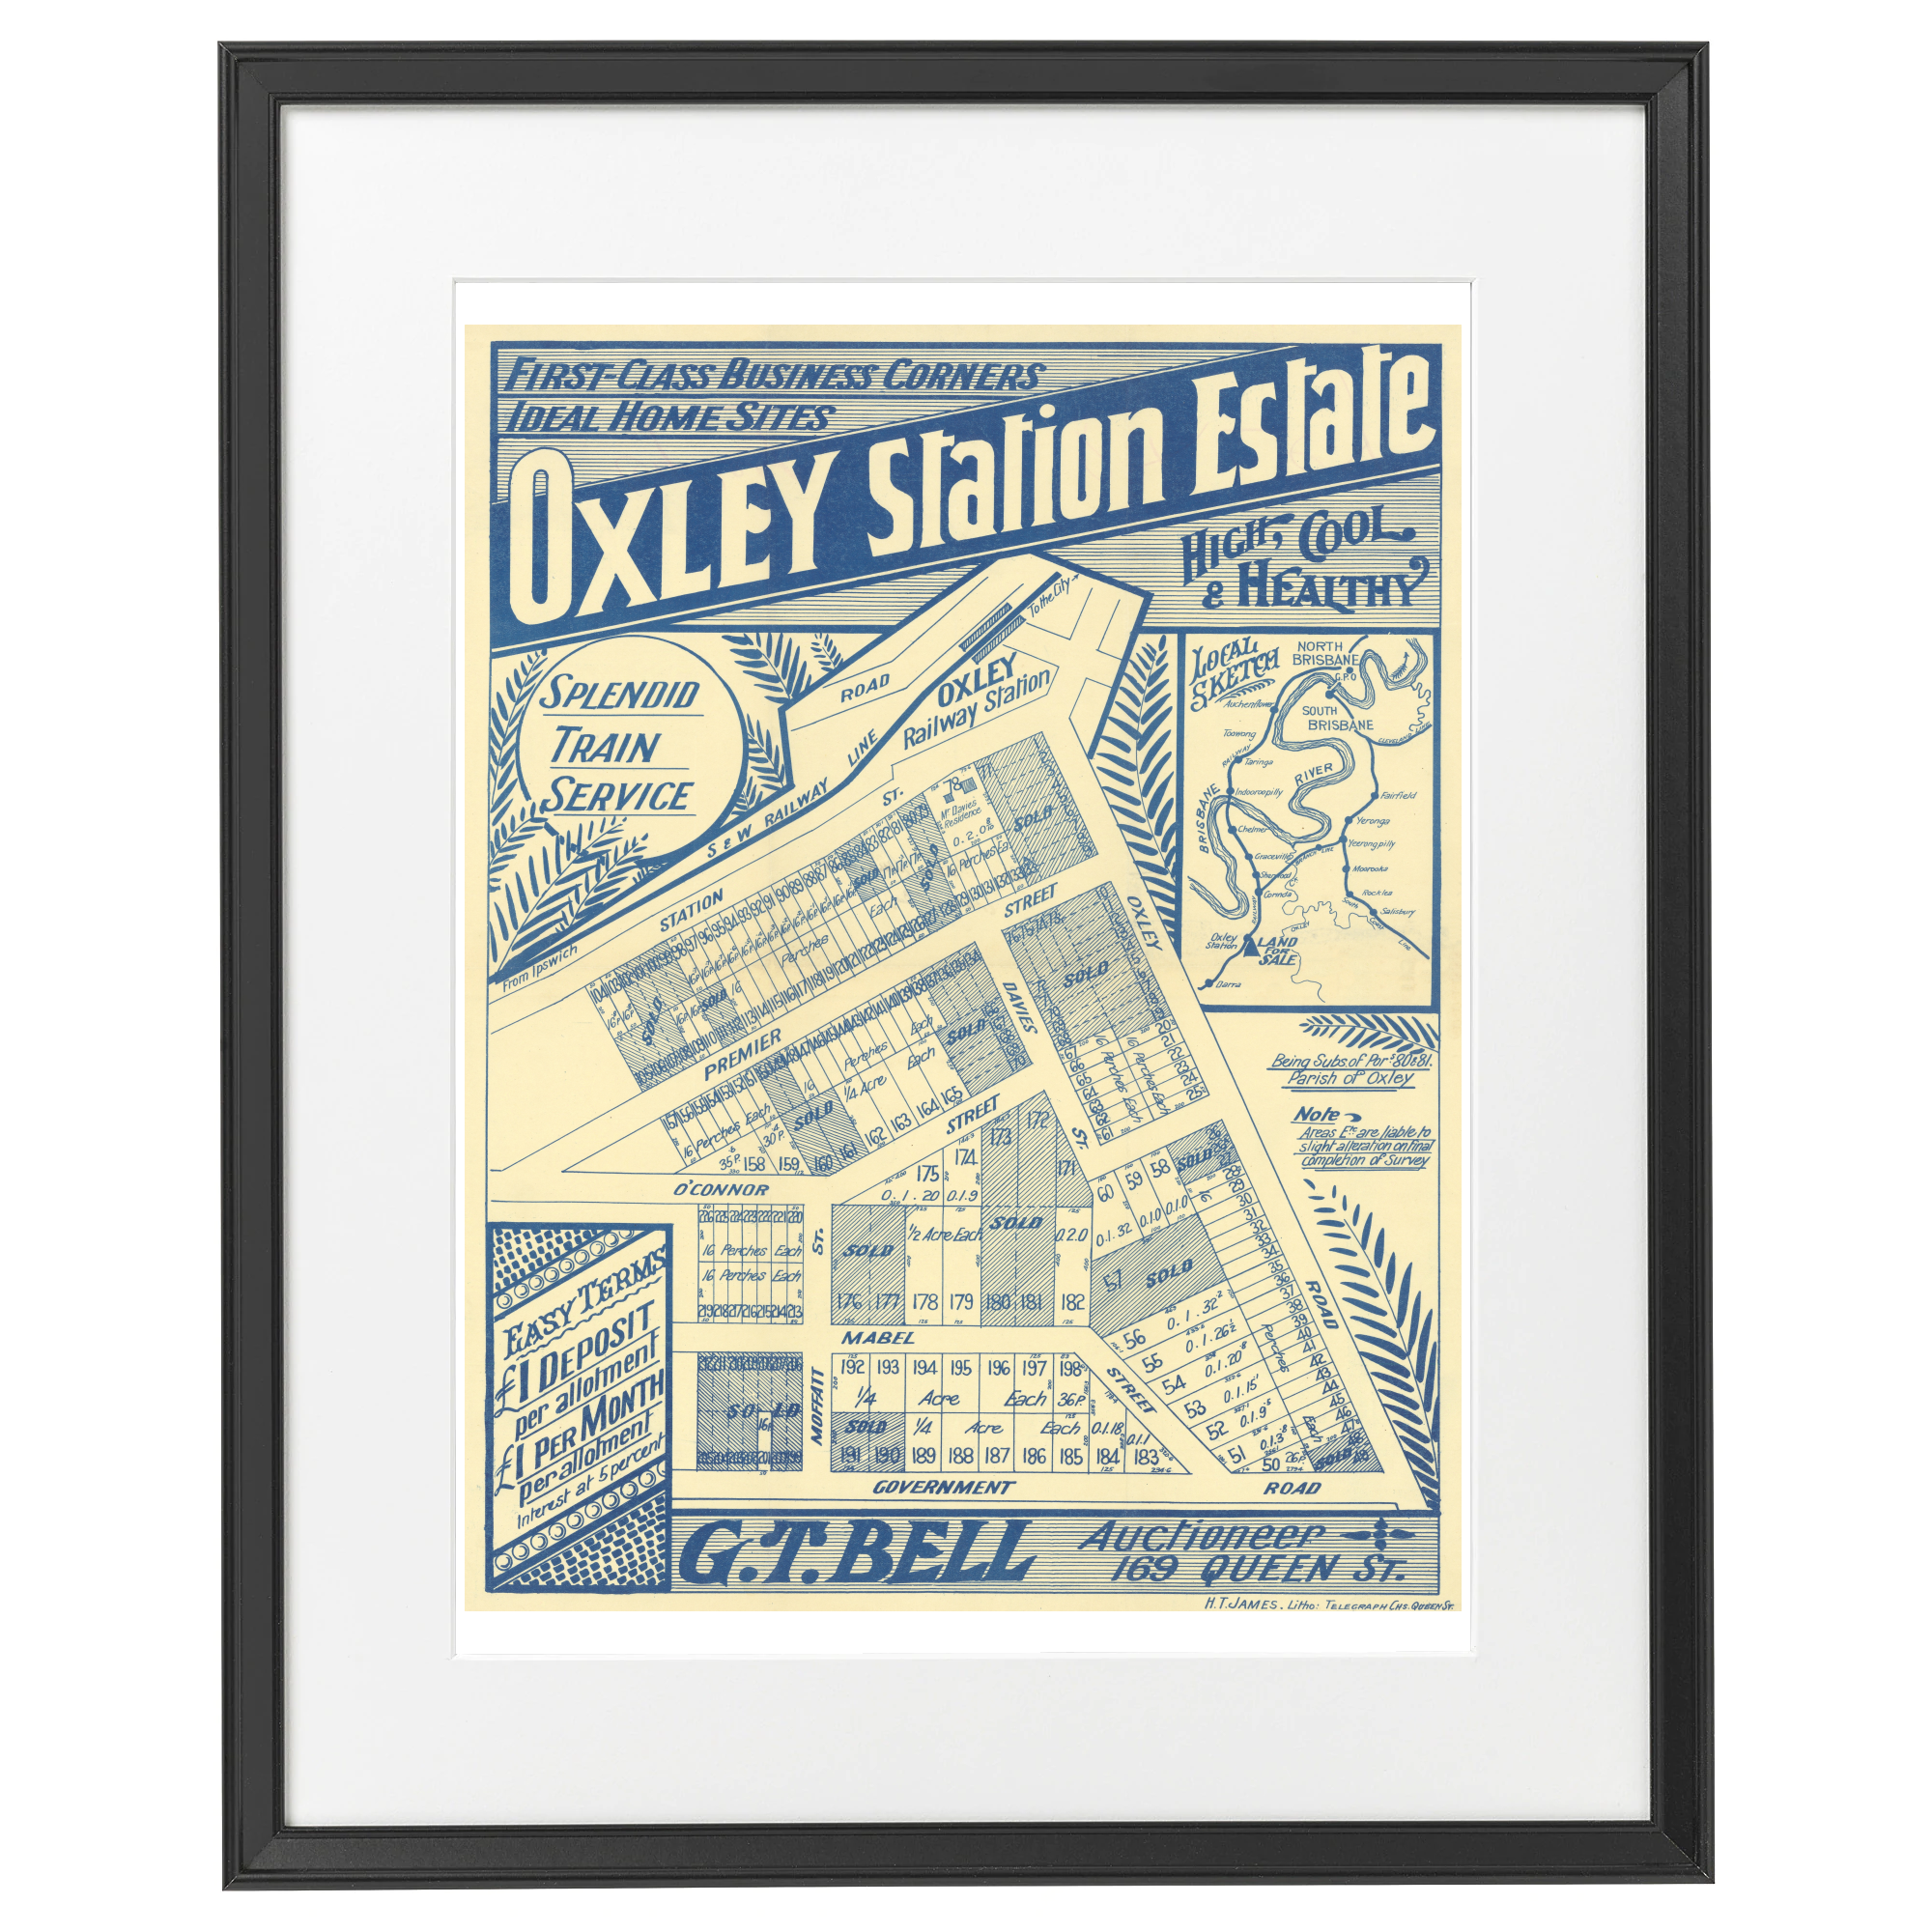 1915 Oxley - Oxley Station Estate